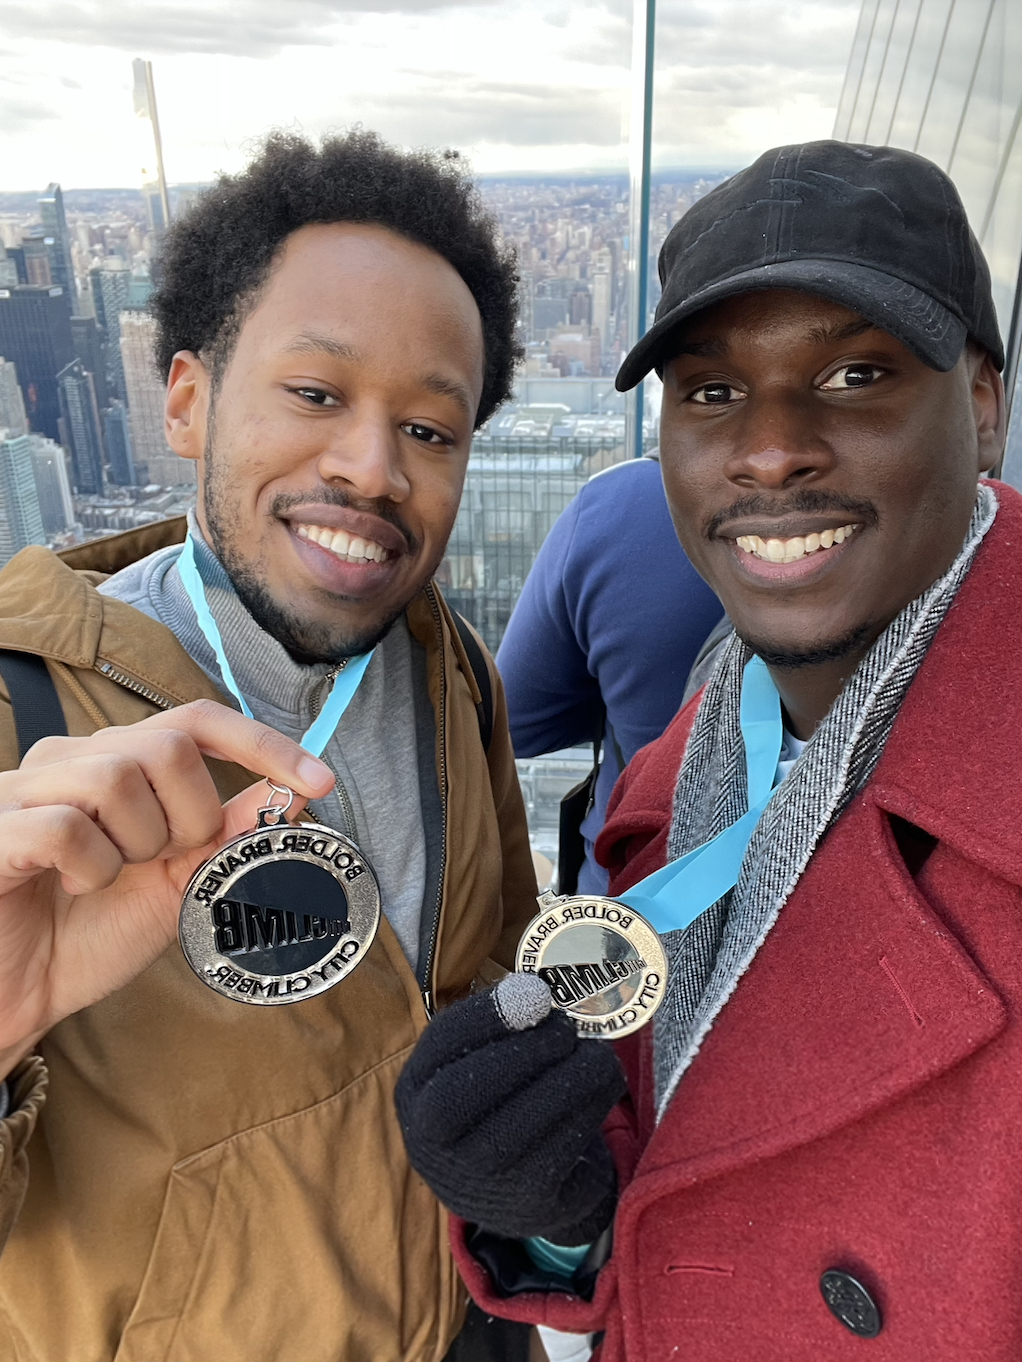 Ajani and Terry holding their medals and smiling